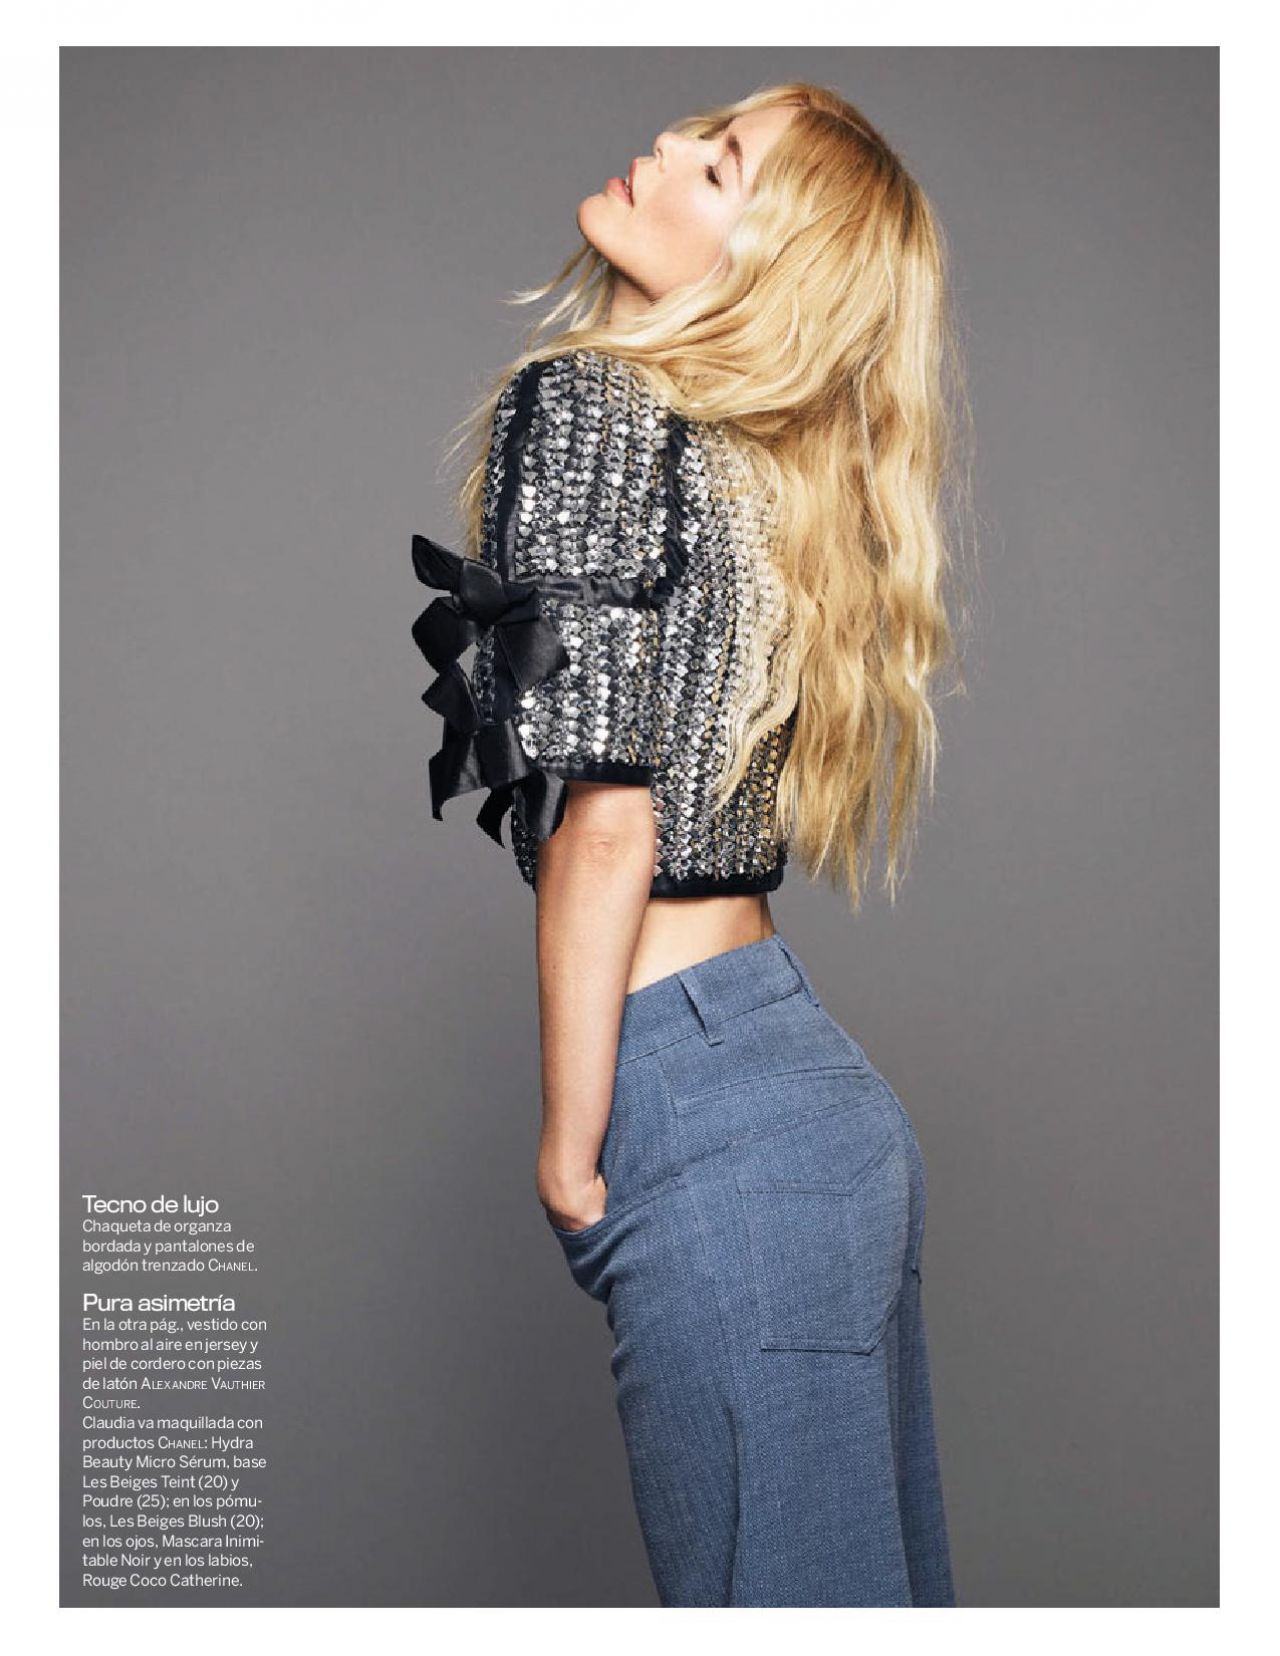 claudia-schiffer-wonder-claudia-woman-spain-july-2016-issue-3